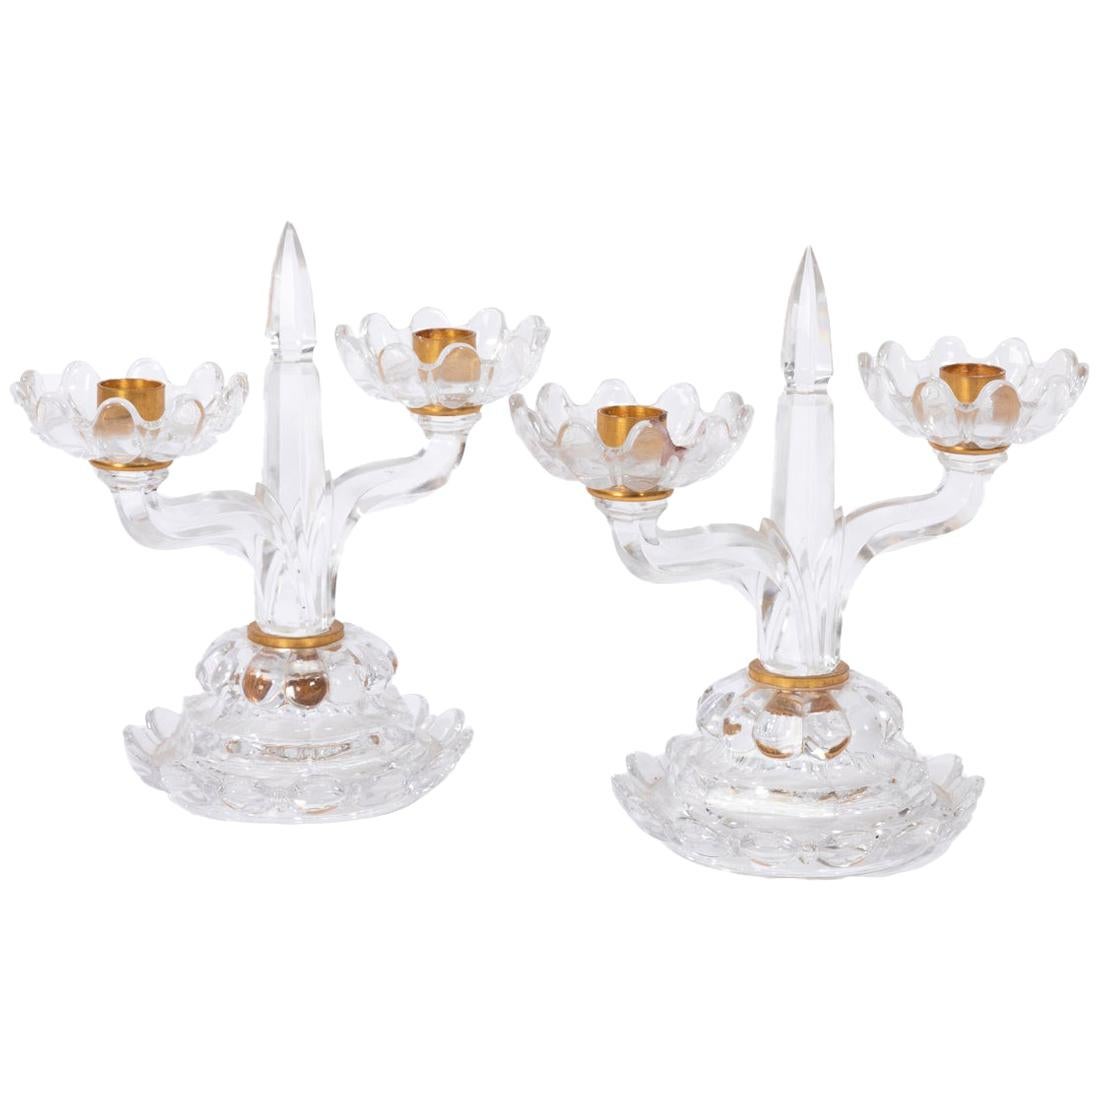 Baccarat, Pair of Crystal Candlesticks, 1950s